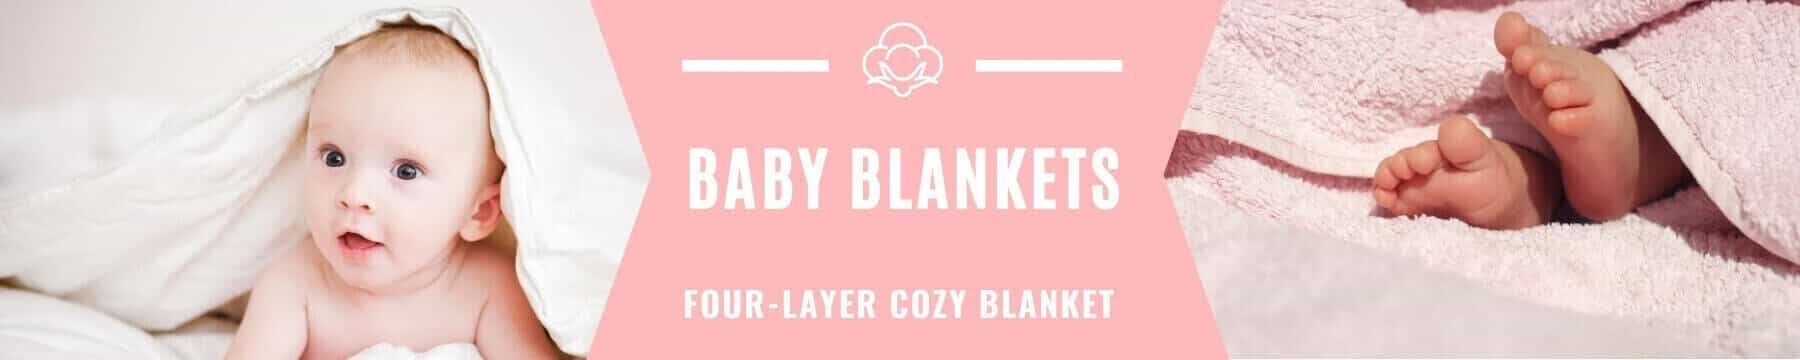 Banner Baby Blankets Collection - Roll Up Baby